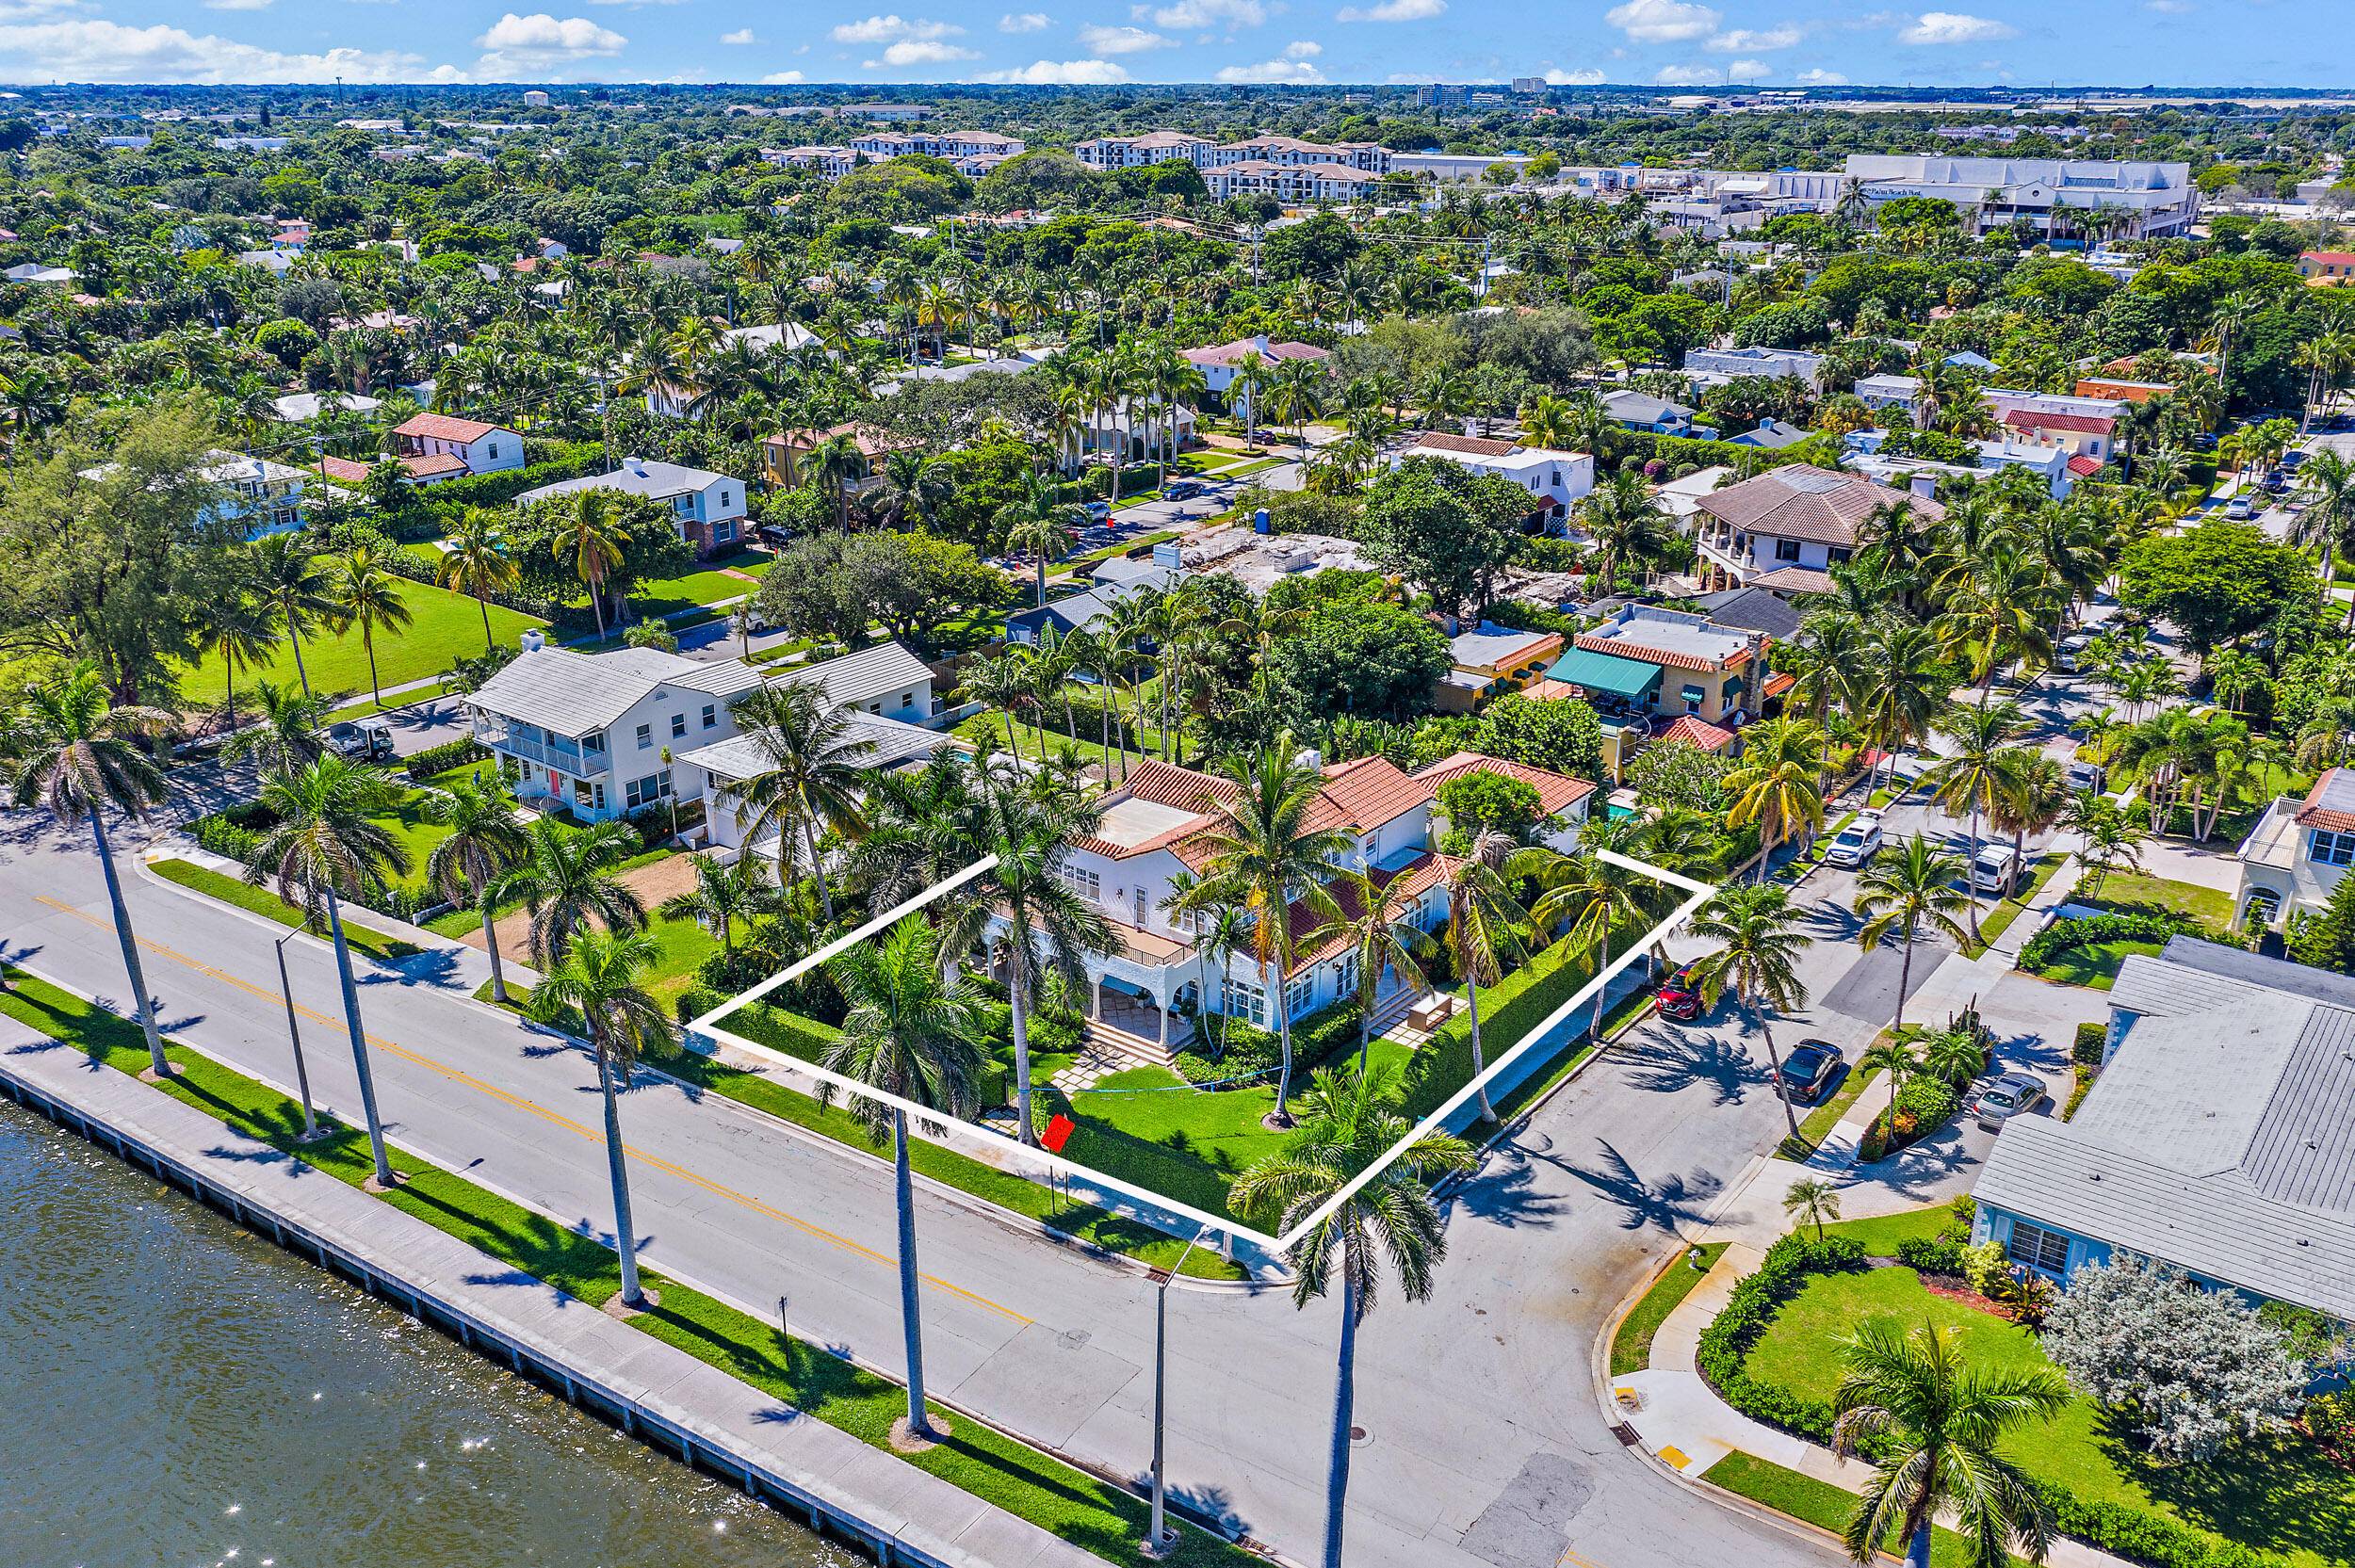 Sumptuous designer living with stunning Palm Beach Waterfront views awaits at this welcoming renovated estate home in West Palm Beach's most prestigious neighborhood, El Cid.